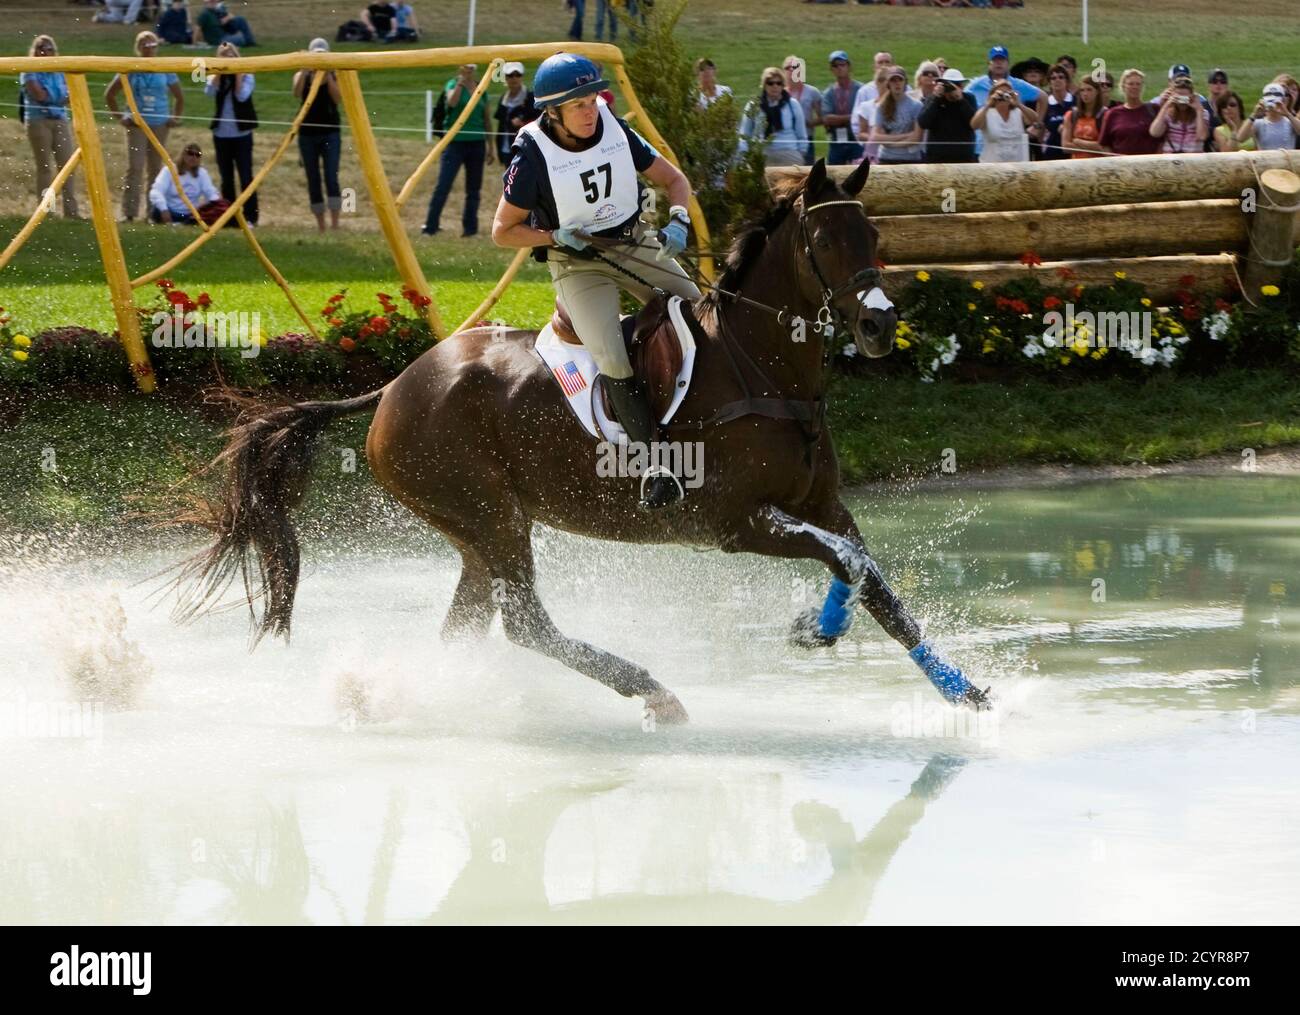 Karen O'Connor of the United States riding Mandiba competes in the cross country phase of the Eventing World Championship at the World Equestrian Games in Lexington, Kentucky, October 2, 2010. REUTERS/Caren Firouz  (UNITED STATES - Tags: SPORT EQUESTRIANISM) Stock Photo